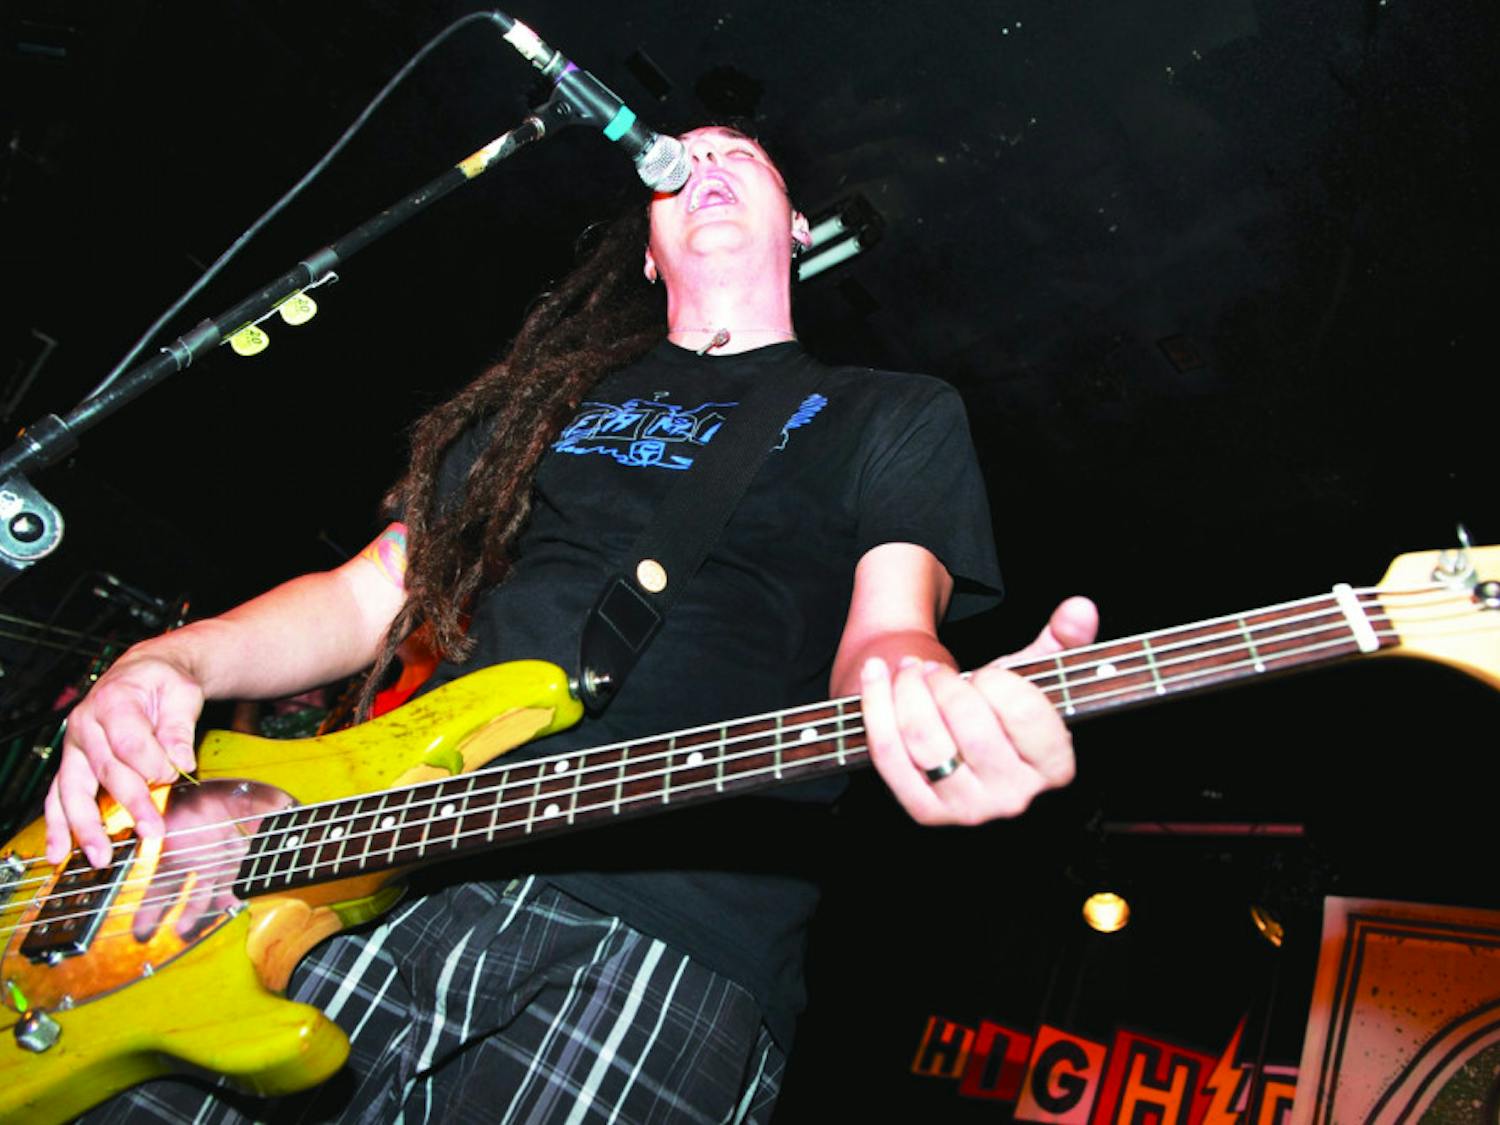 Less Than Jake vocalist and bassist Roger Manganelli plays at the High Dive during the band’s Wake and Bake event in 2012. The band will perform t at the High Dive Aug. 30-Aug. 31.